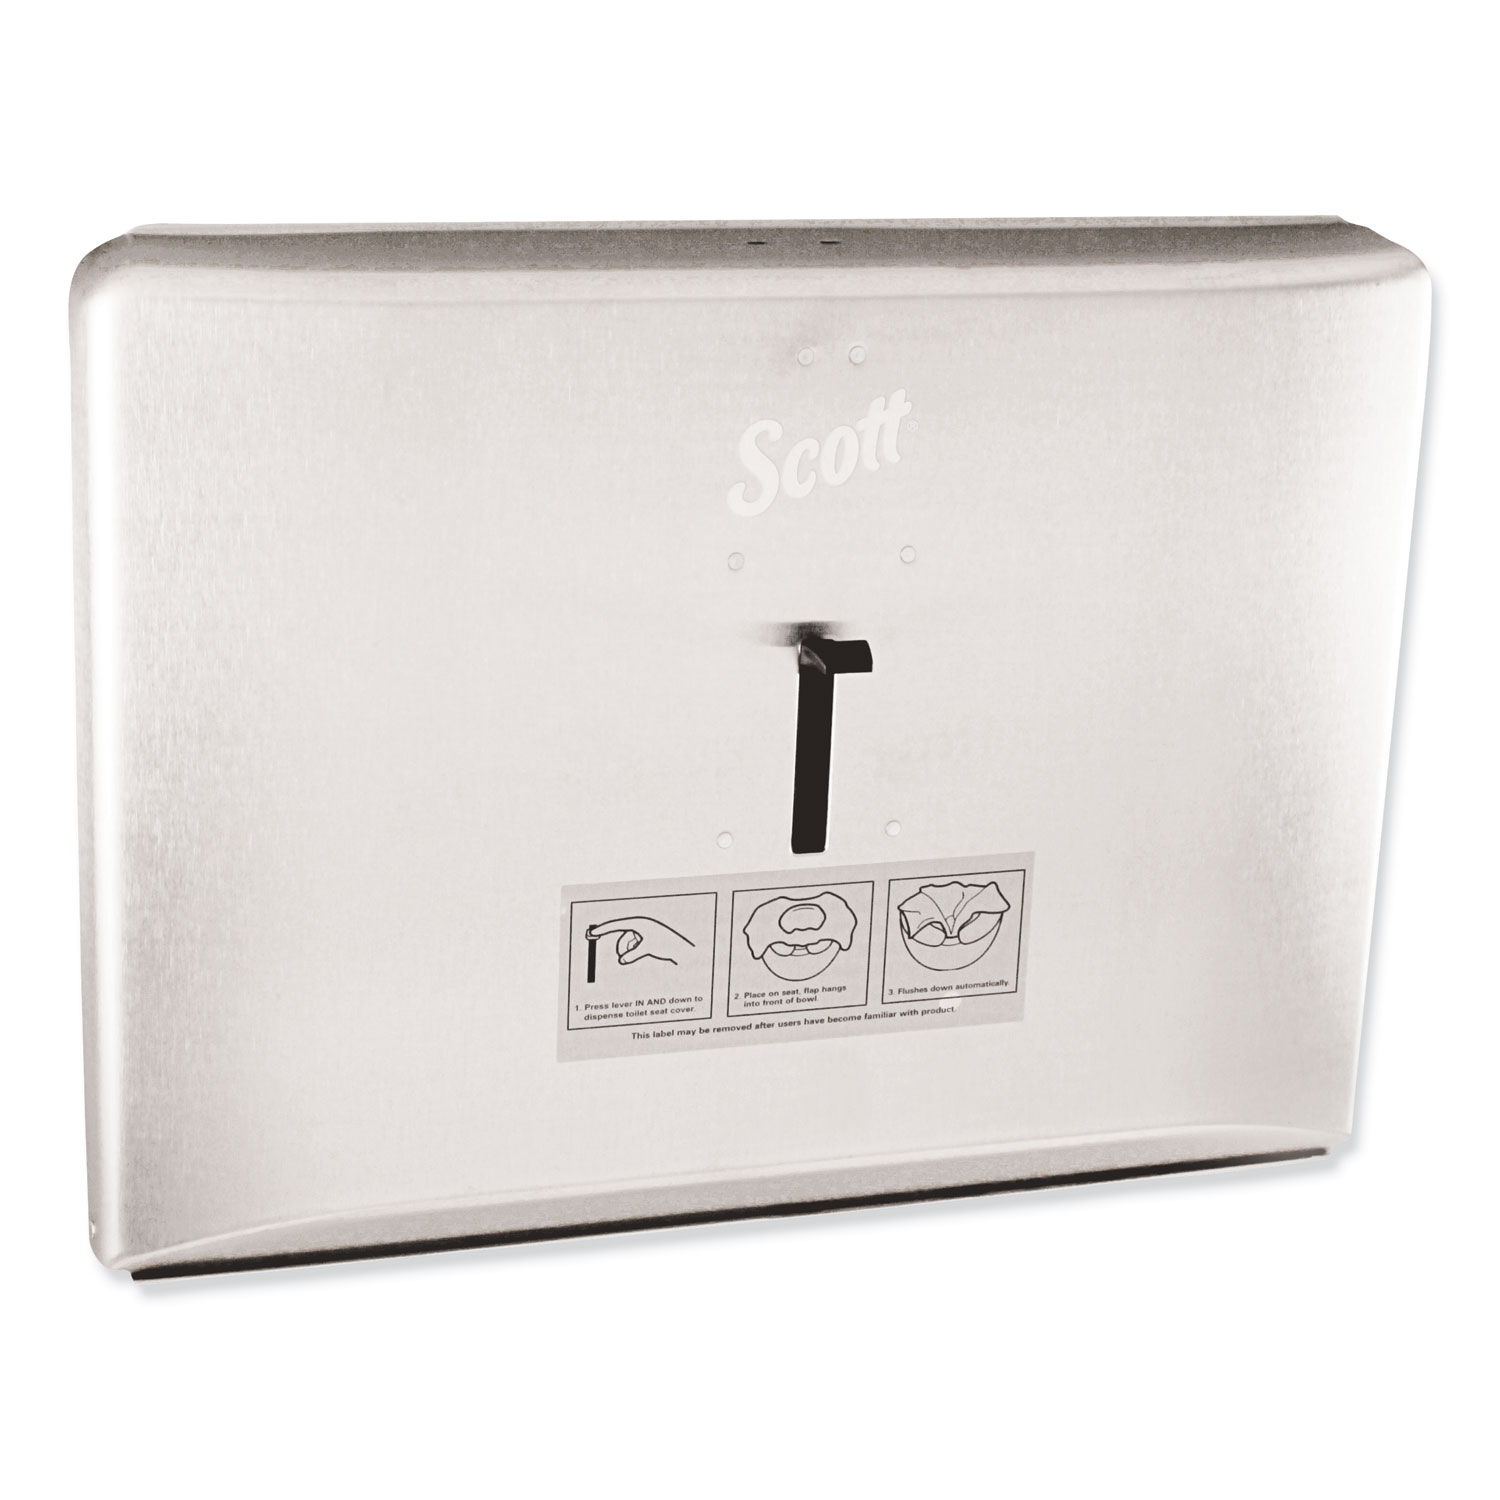  Scott KCC 09512 Personal Seat Toilet Seat Cover Dispenser, Stainless Steel, 16.6 x 12.3 x 2.5 (KCC09512) 